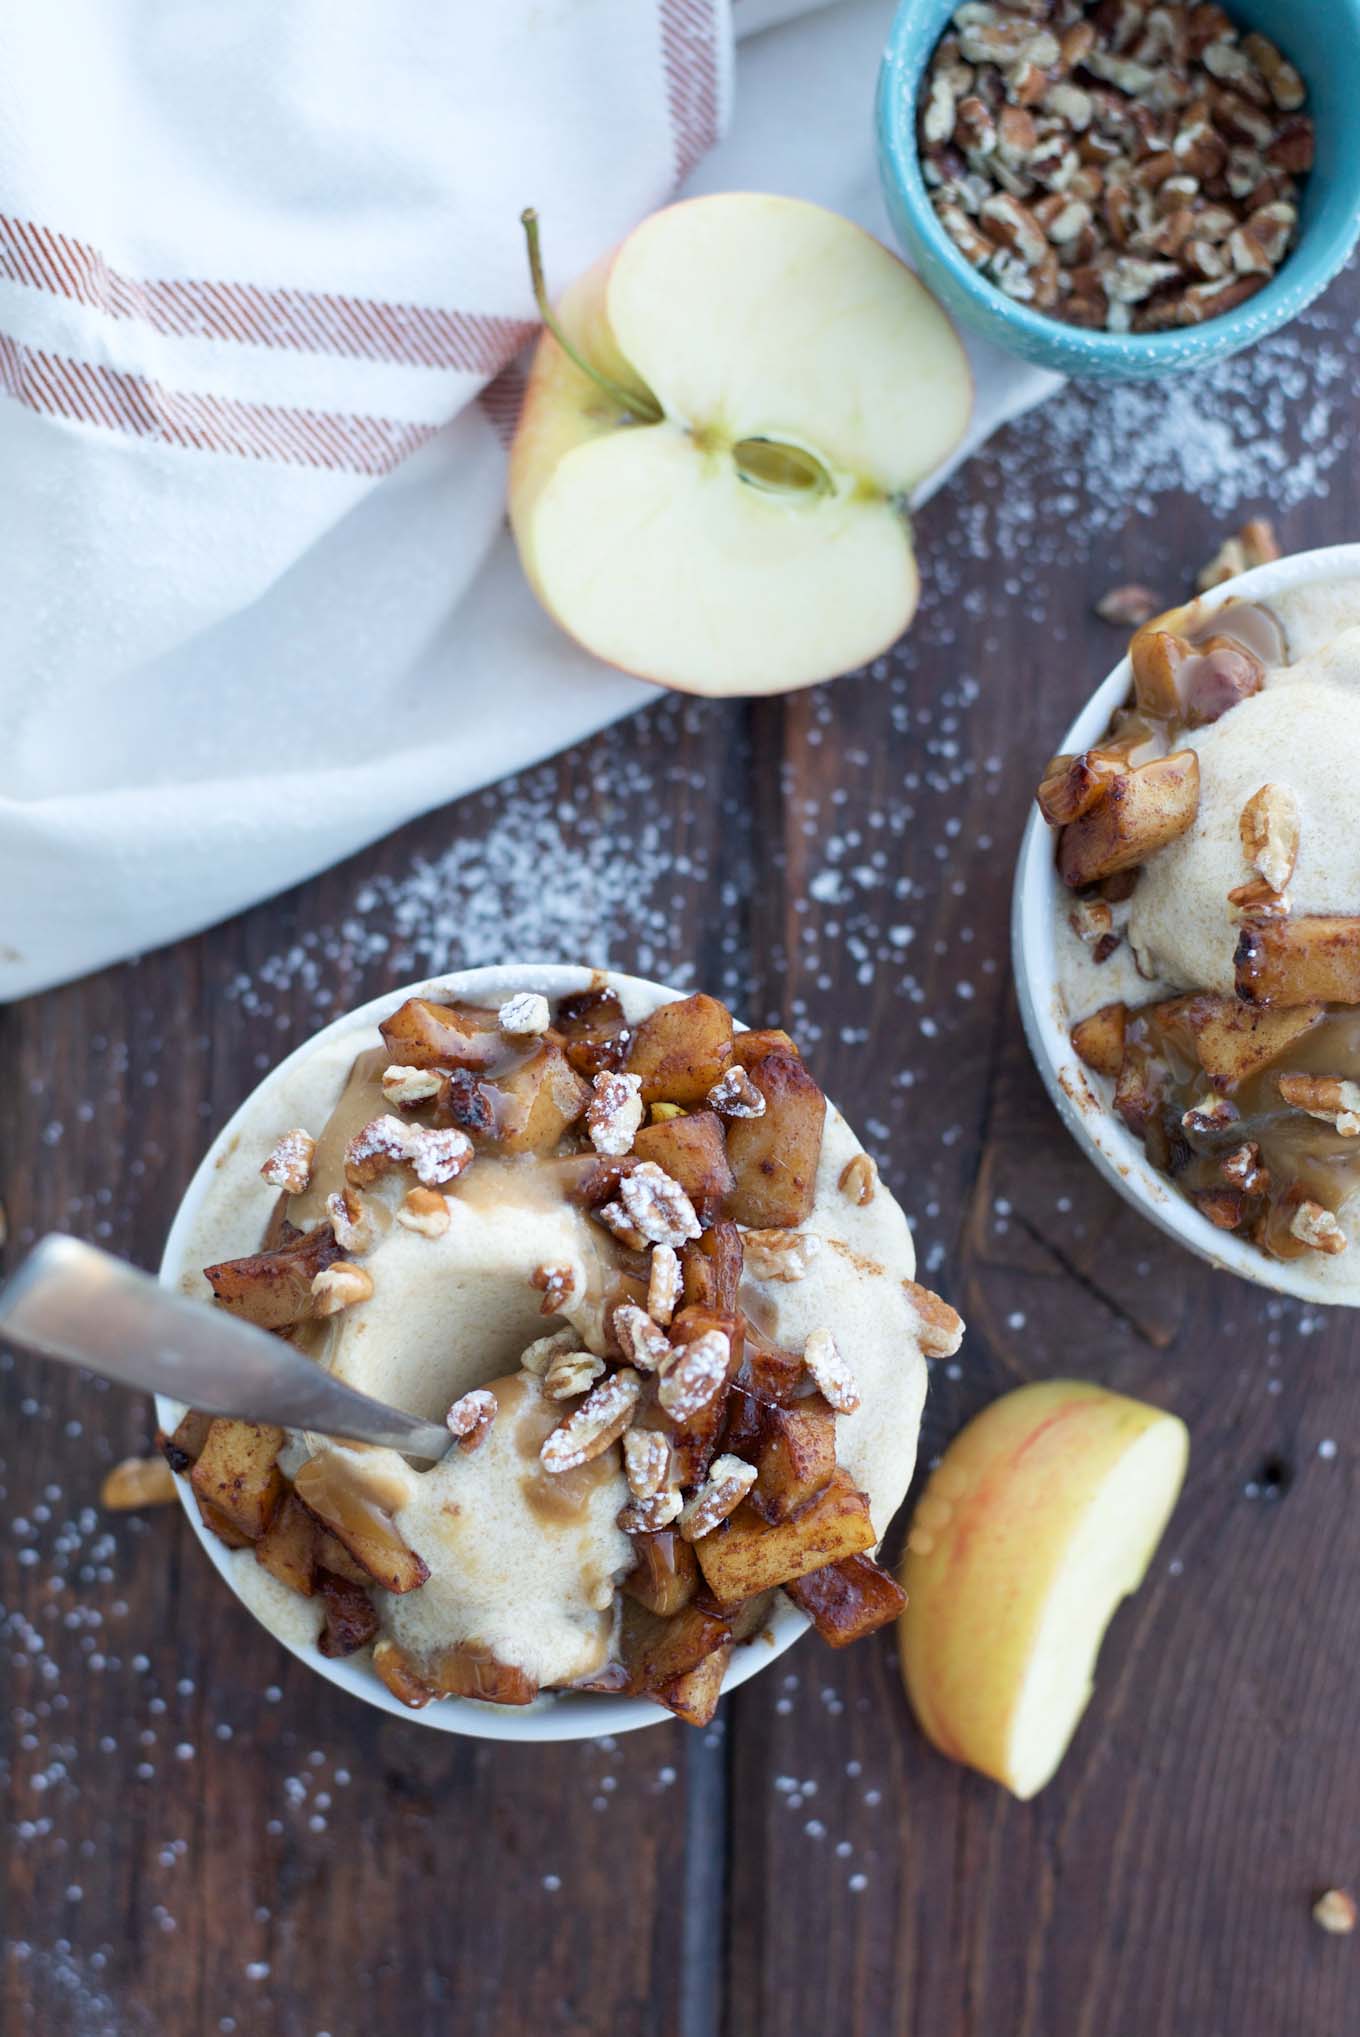 Easy 2-step Caramel Apple Cider Ice Cream bring all the flavors to fall in a delicious dessert.